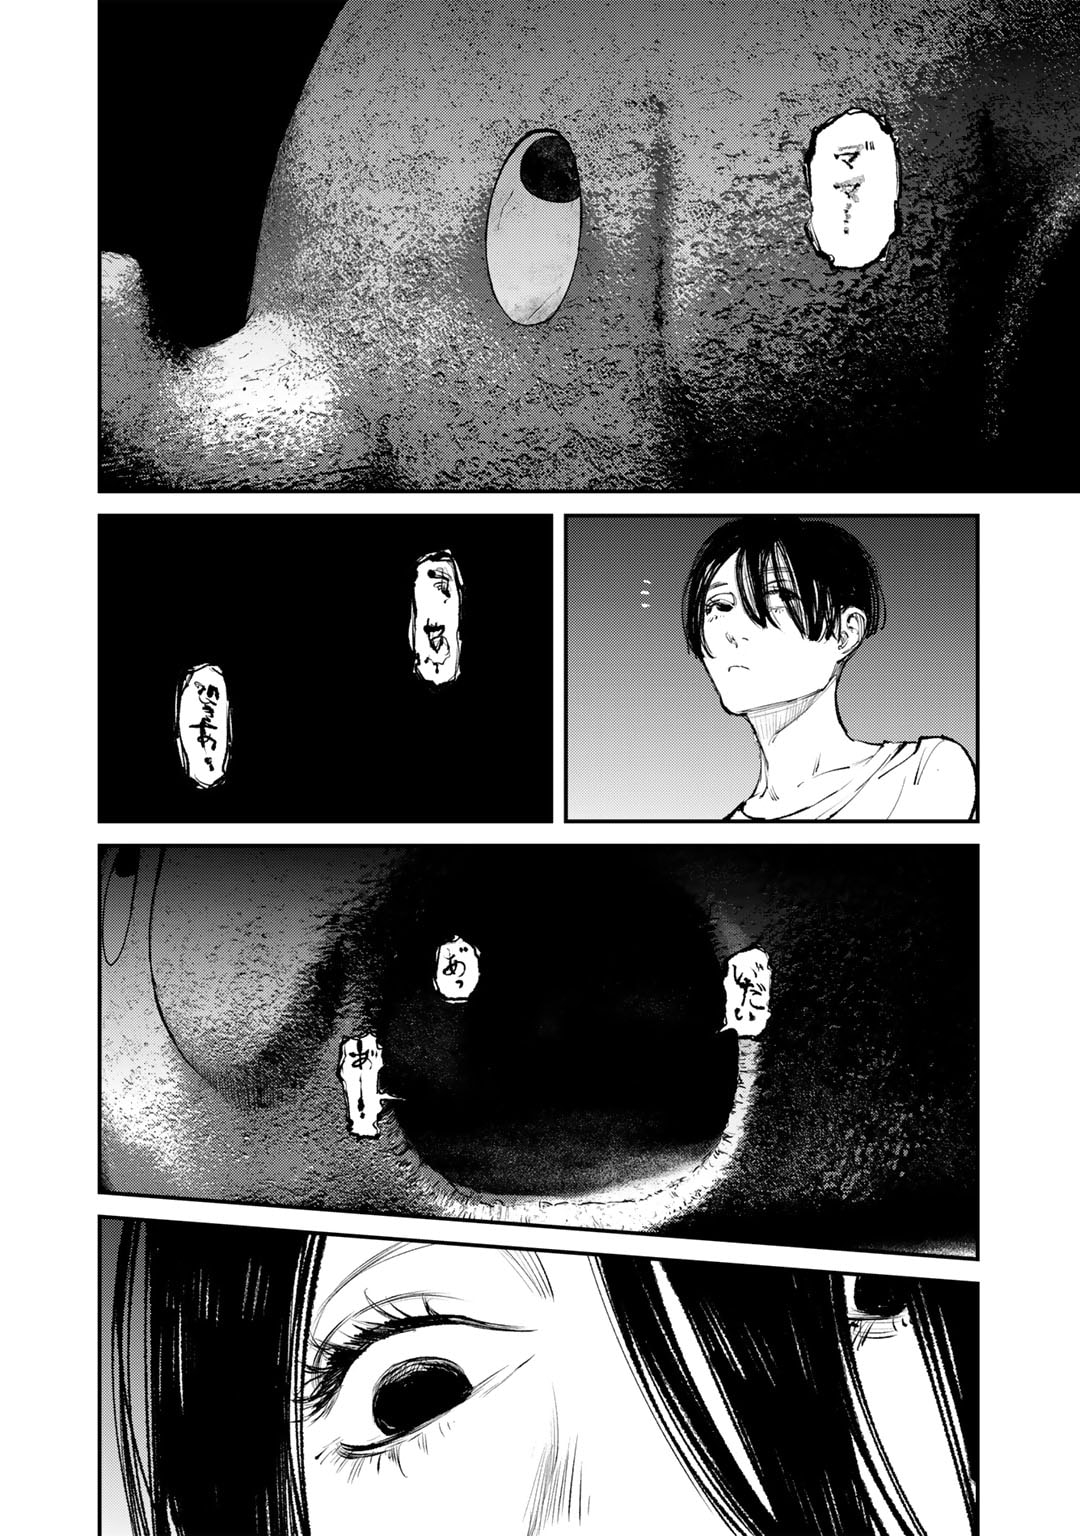 Kanata Is Into More Darker - Chapter 2 - Page 8